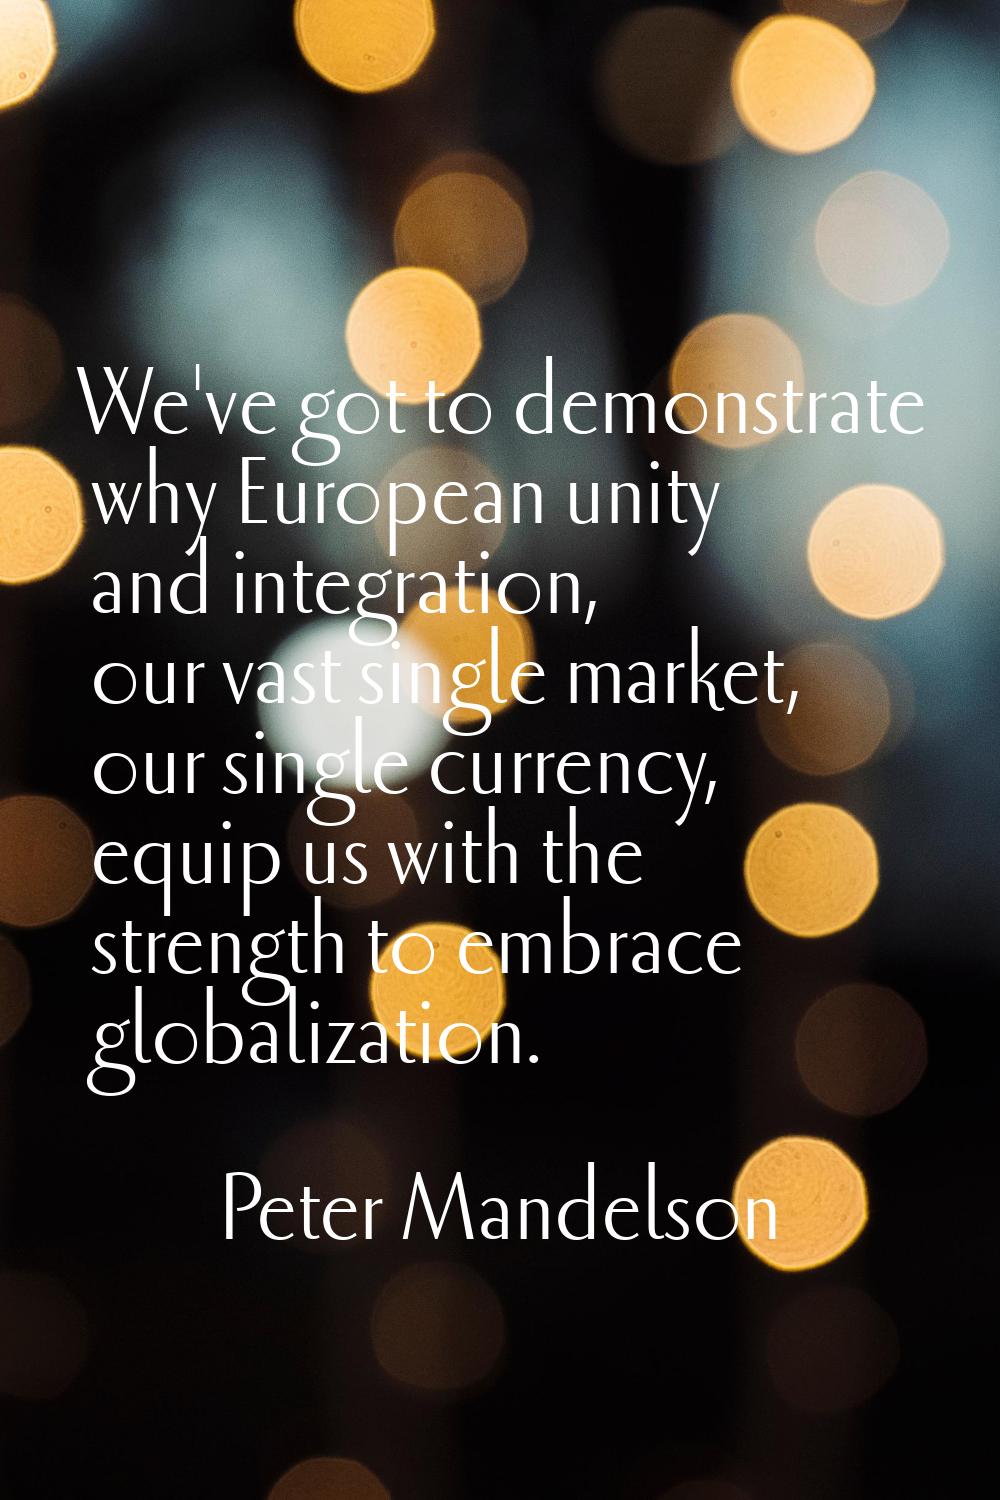 We've got to demonstrate why European unity and integration, our vast single market, our single cur